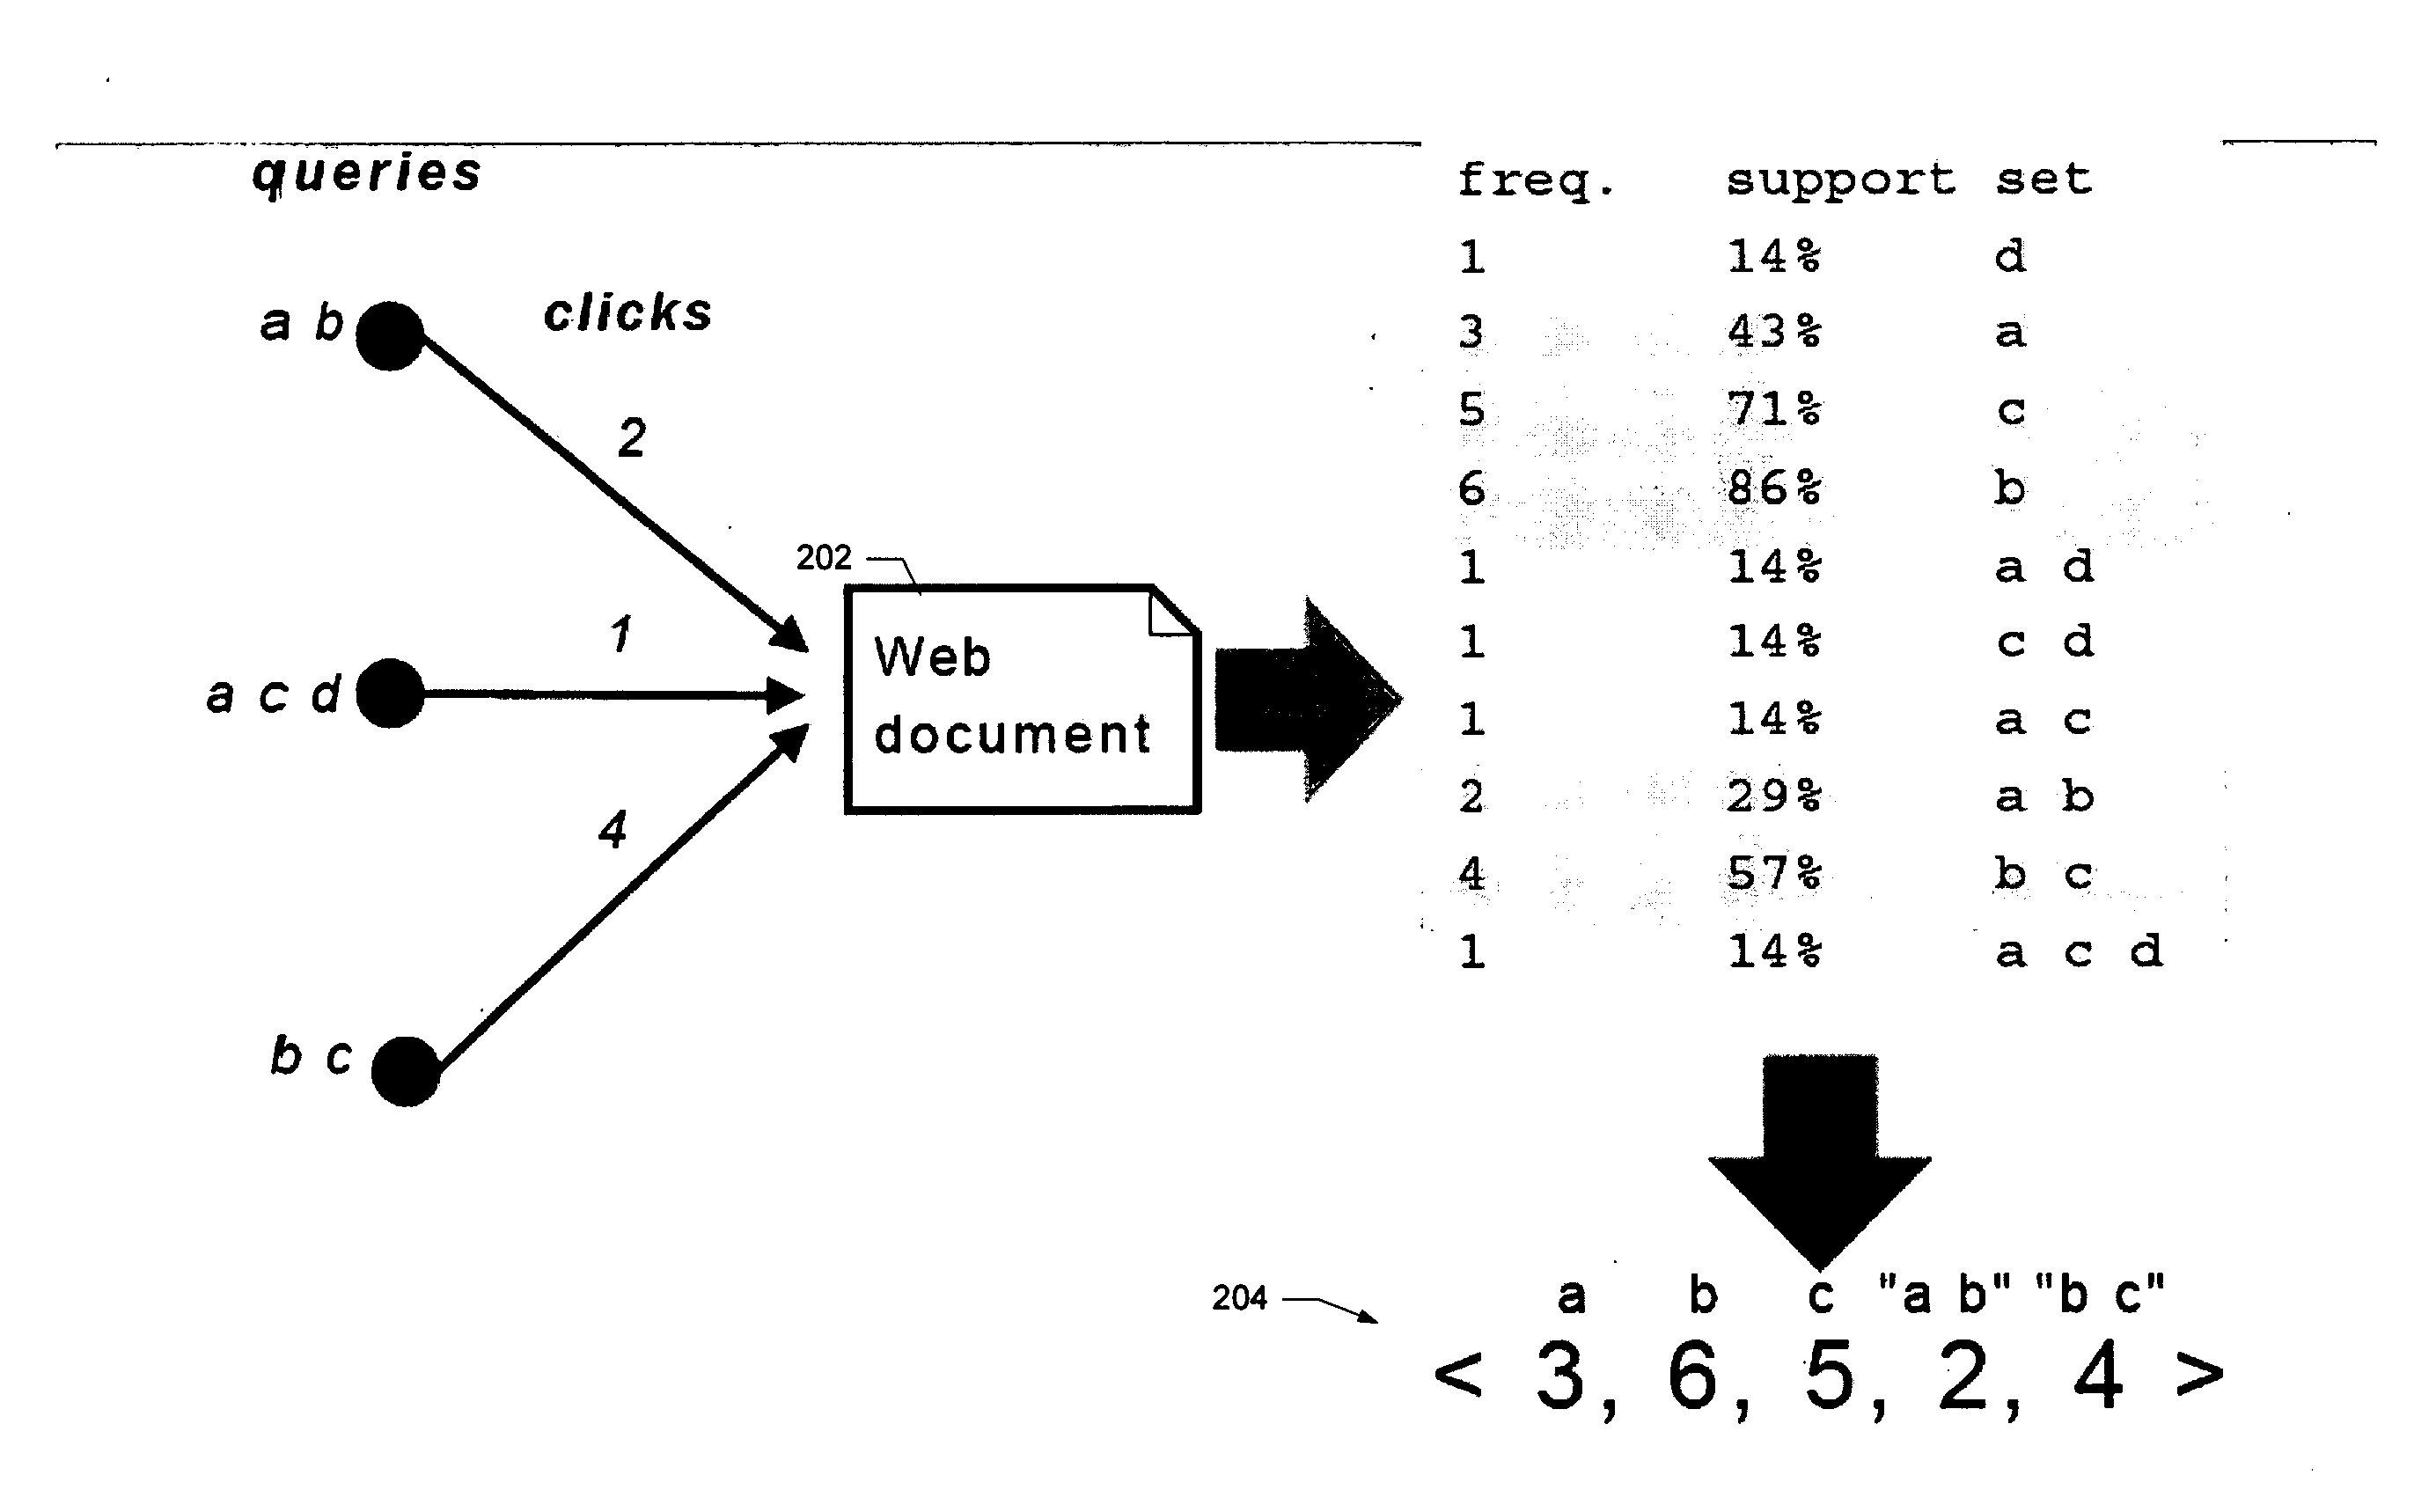 Classifying documents using implicit feedback and query patterns